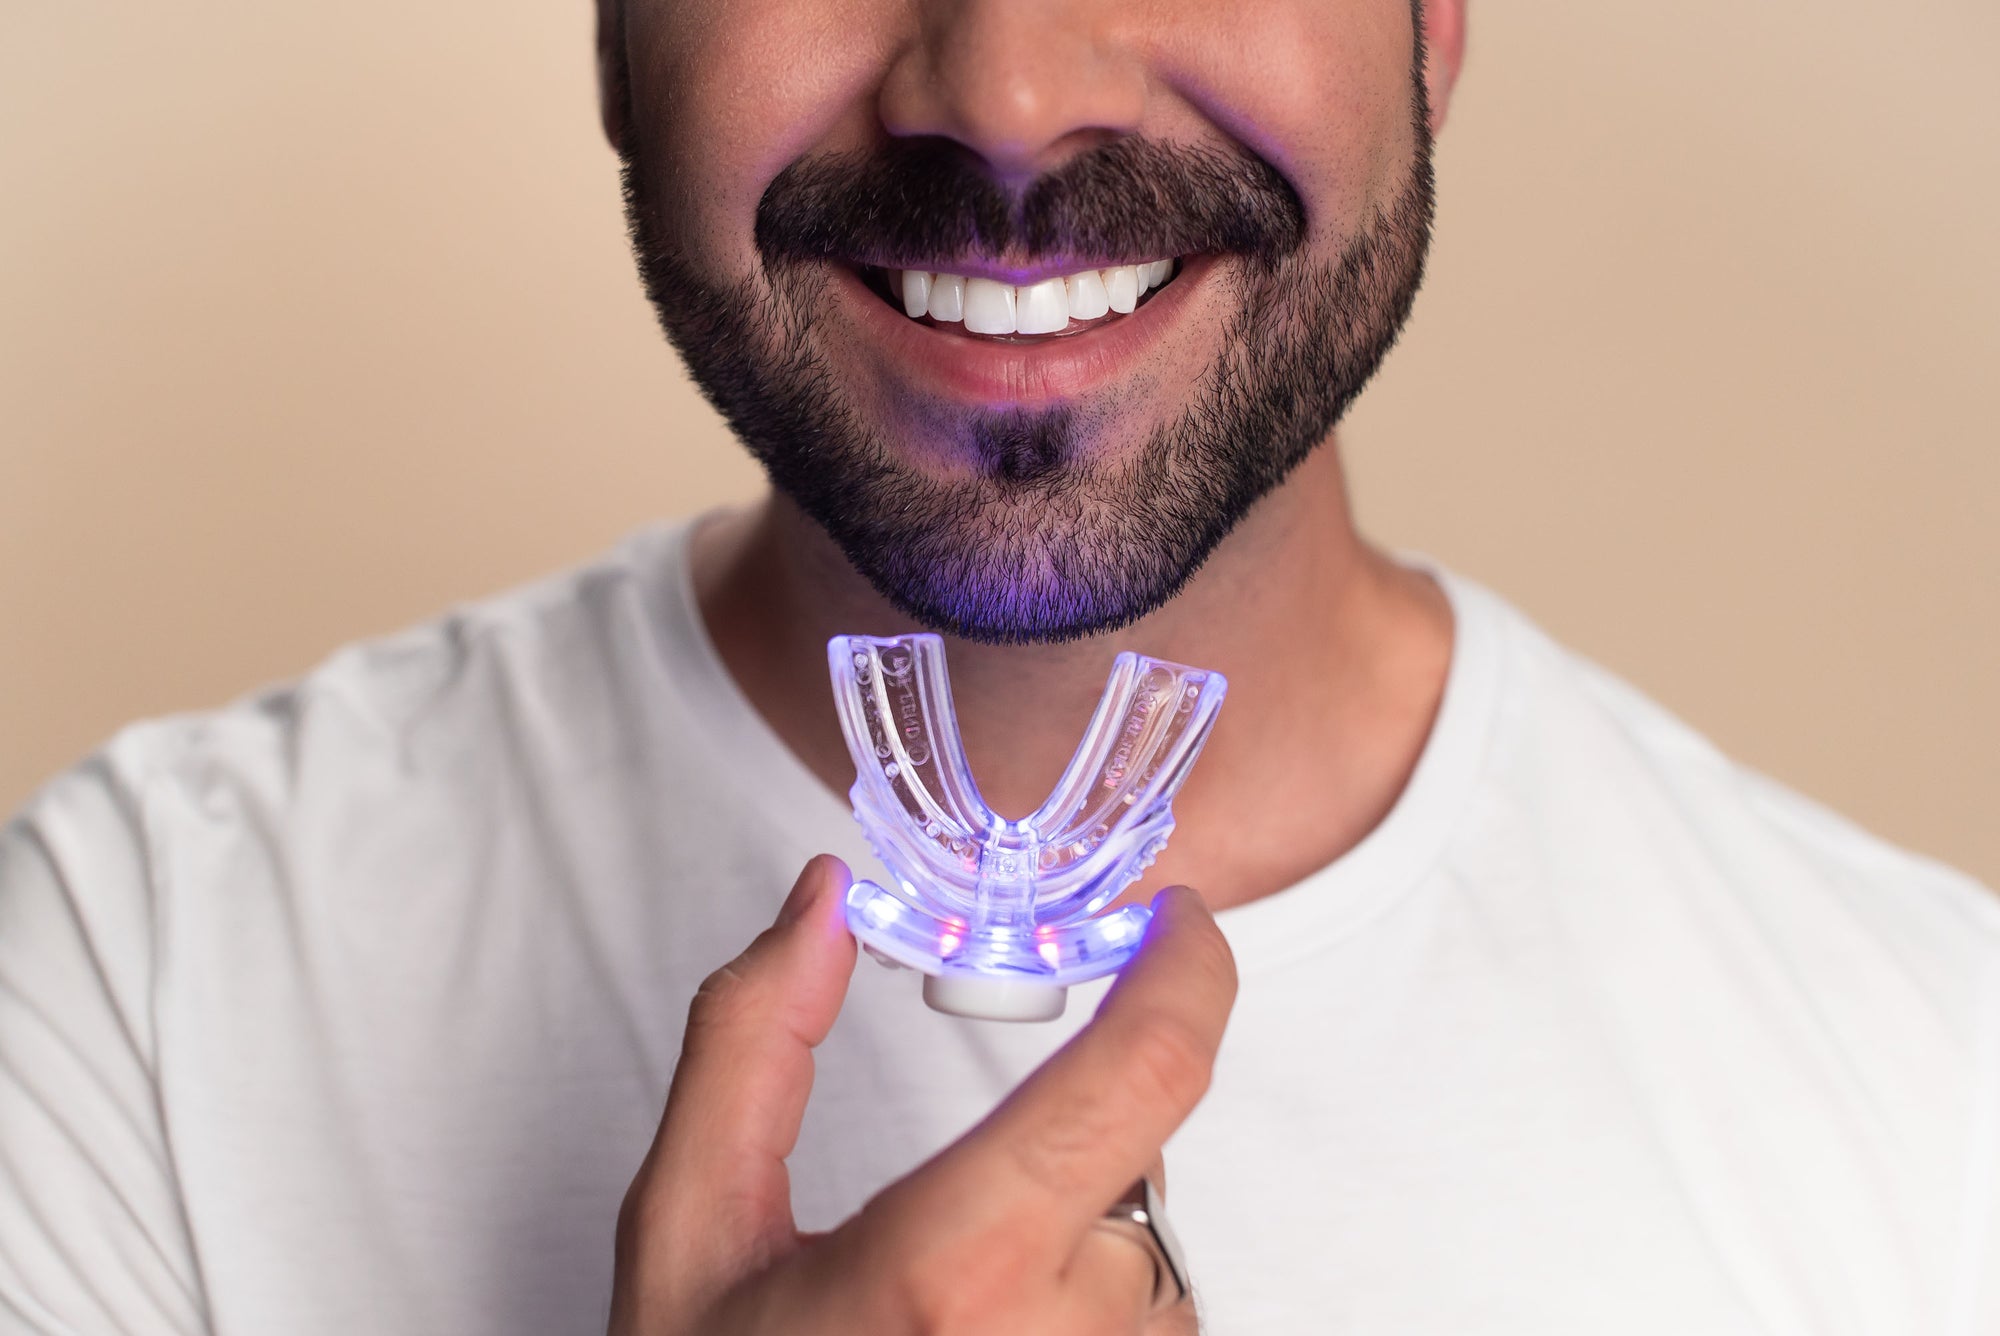 How to Protect Your Gums During Teeth Whitening